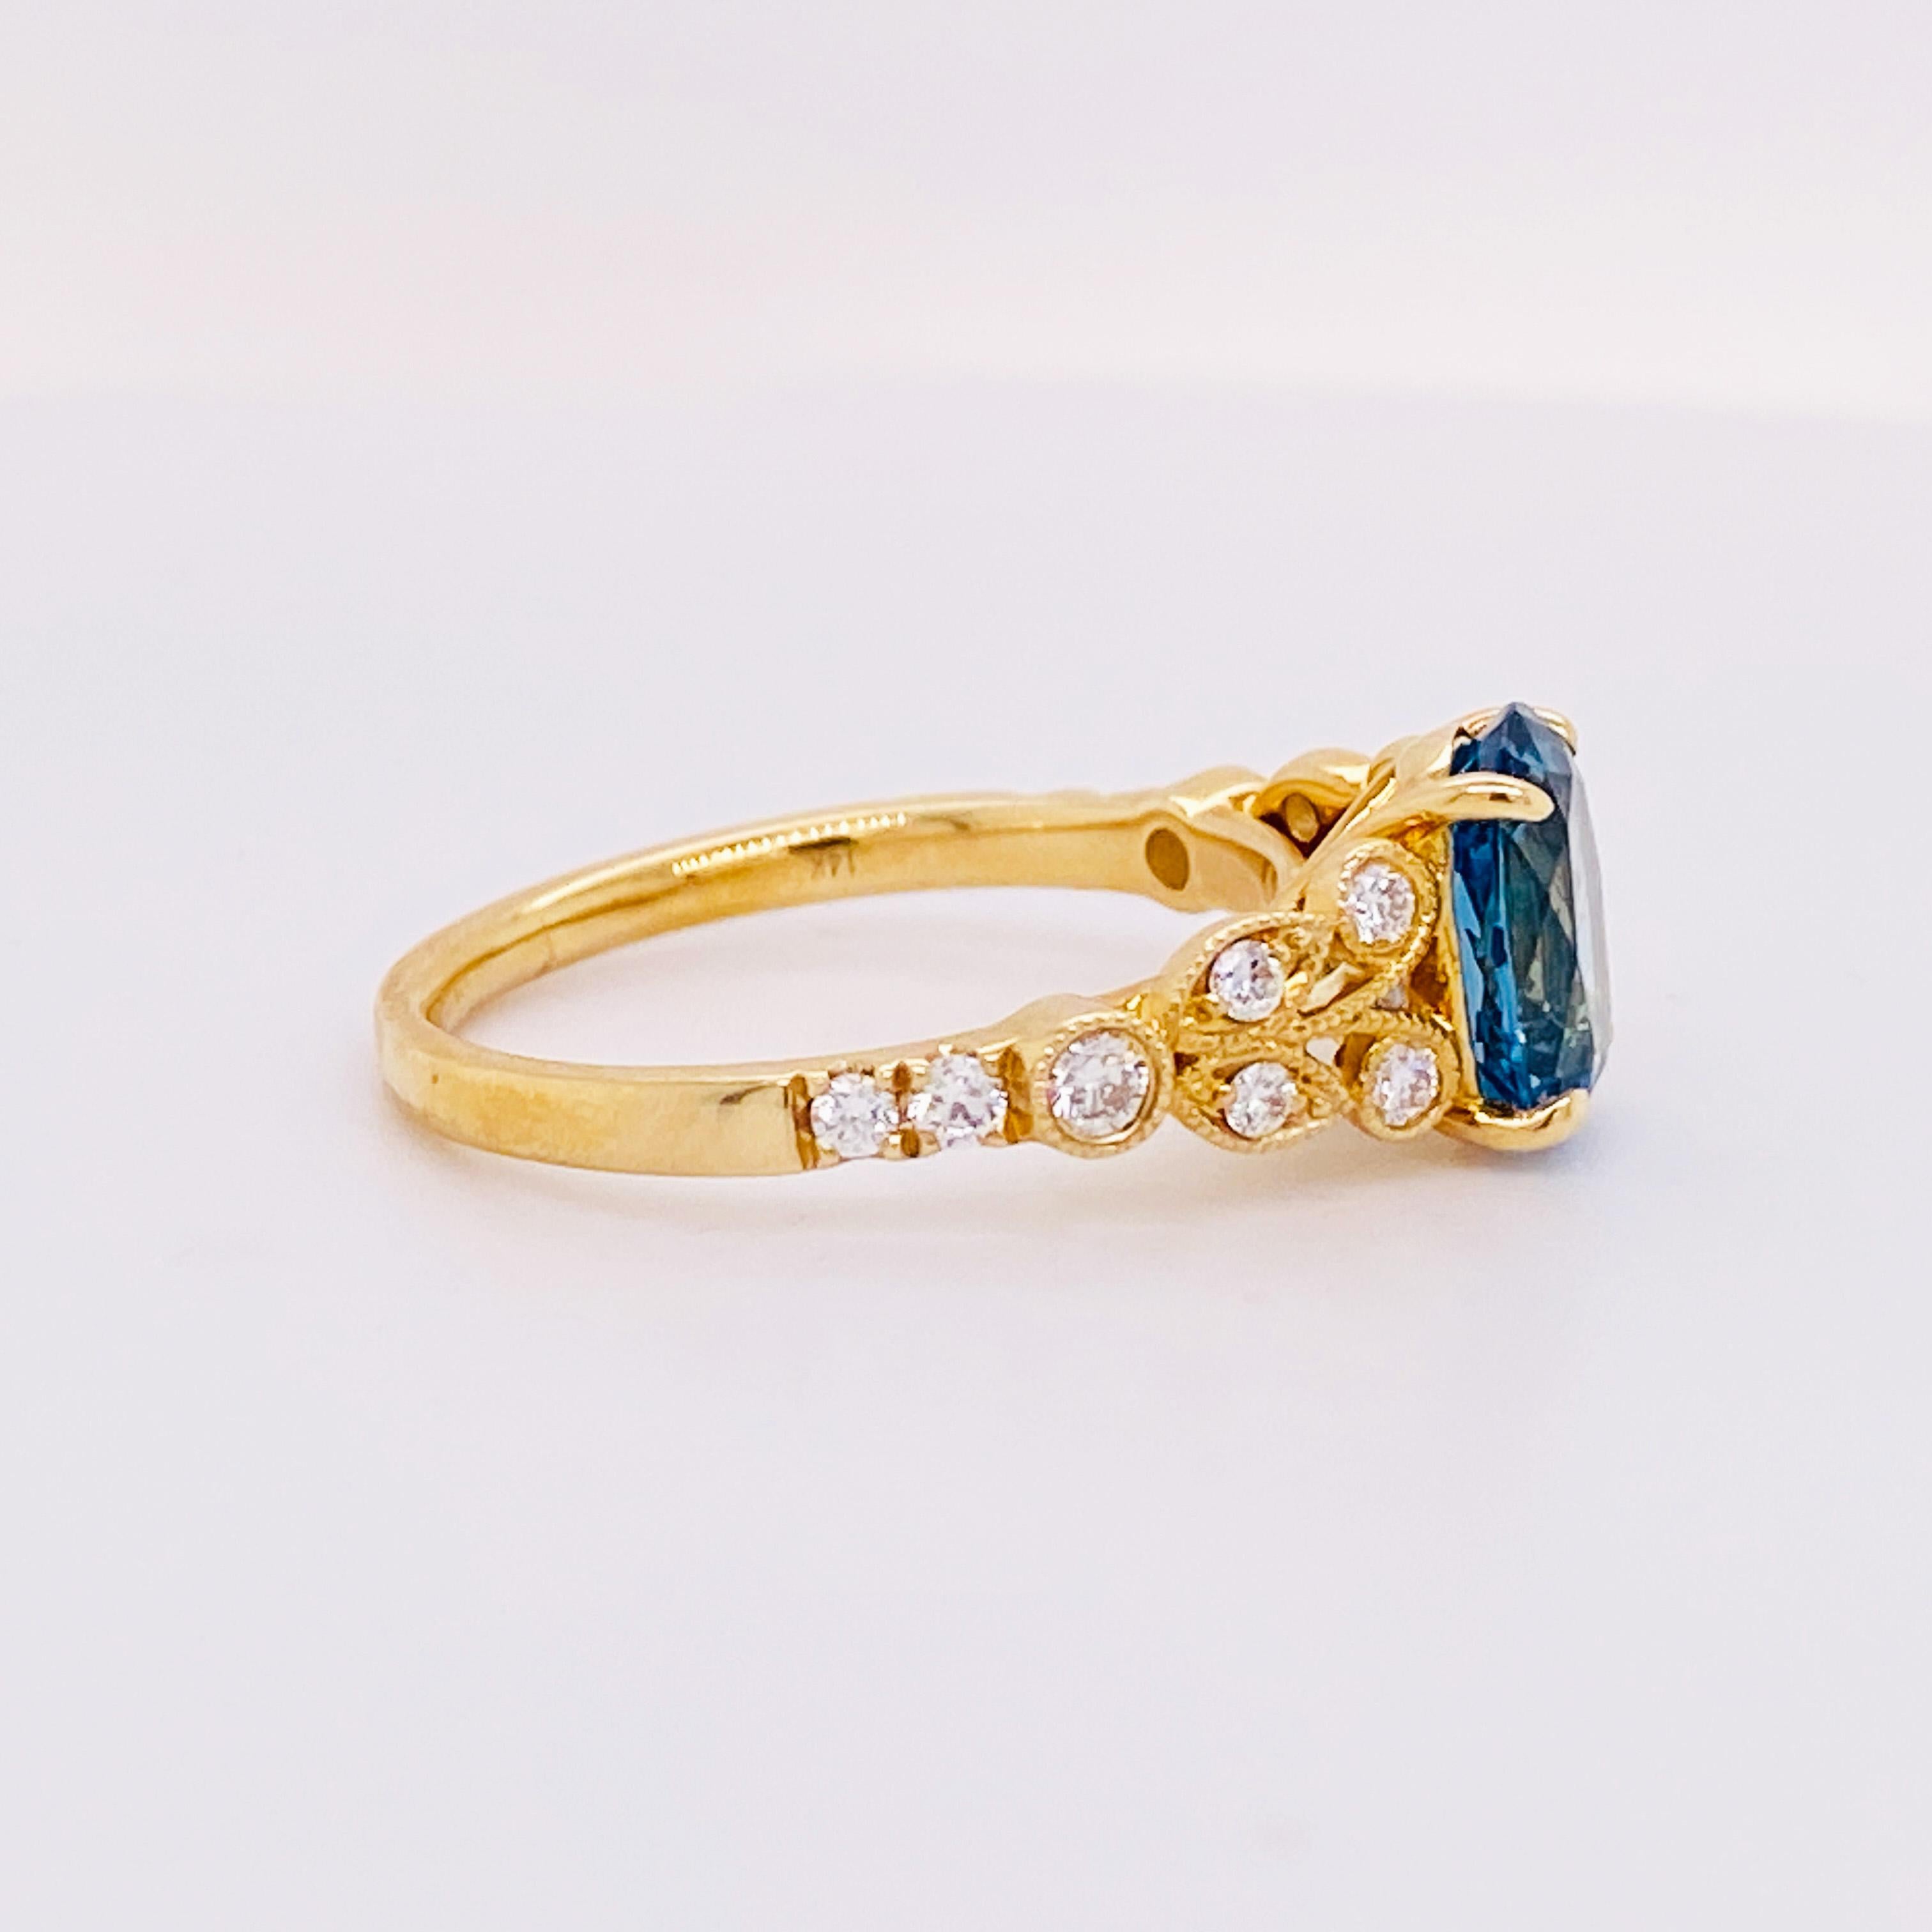 2 Carat Blue Zircon with Diamonds Nature-Inspired Ring in 14K Yellow Gold For Sale 4